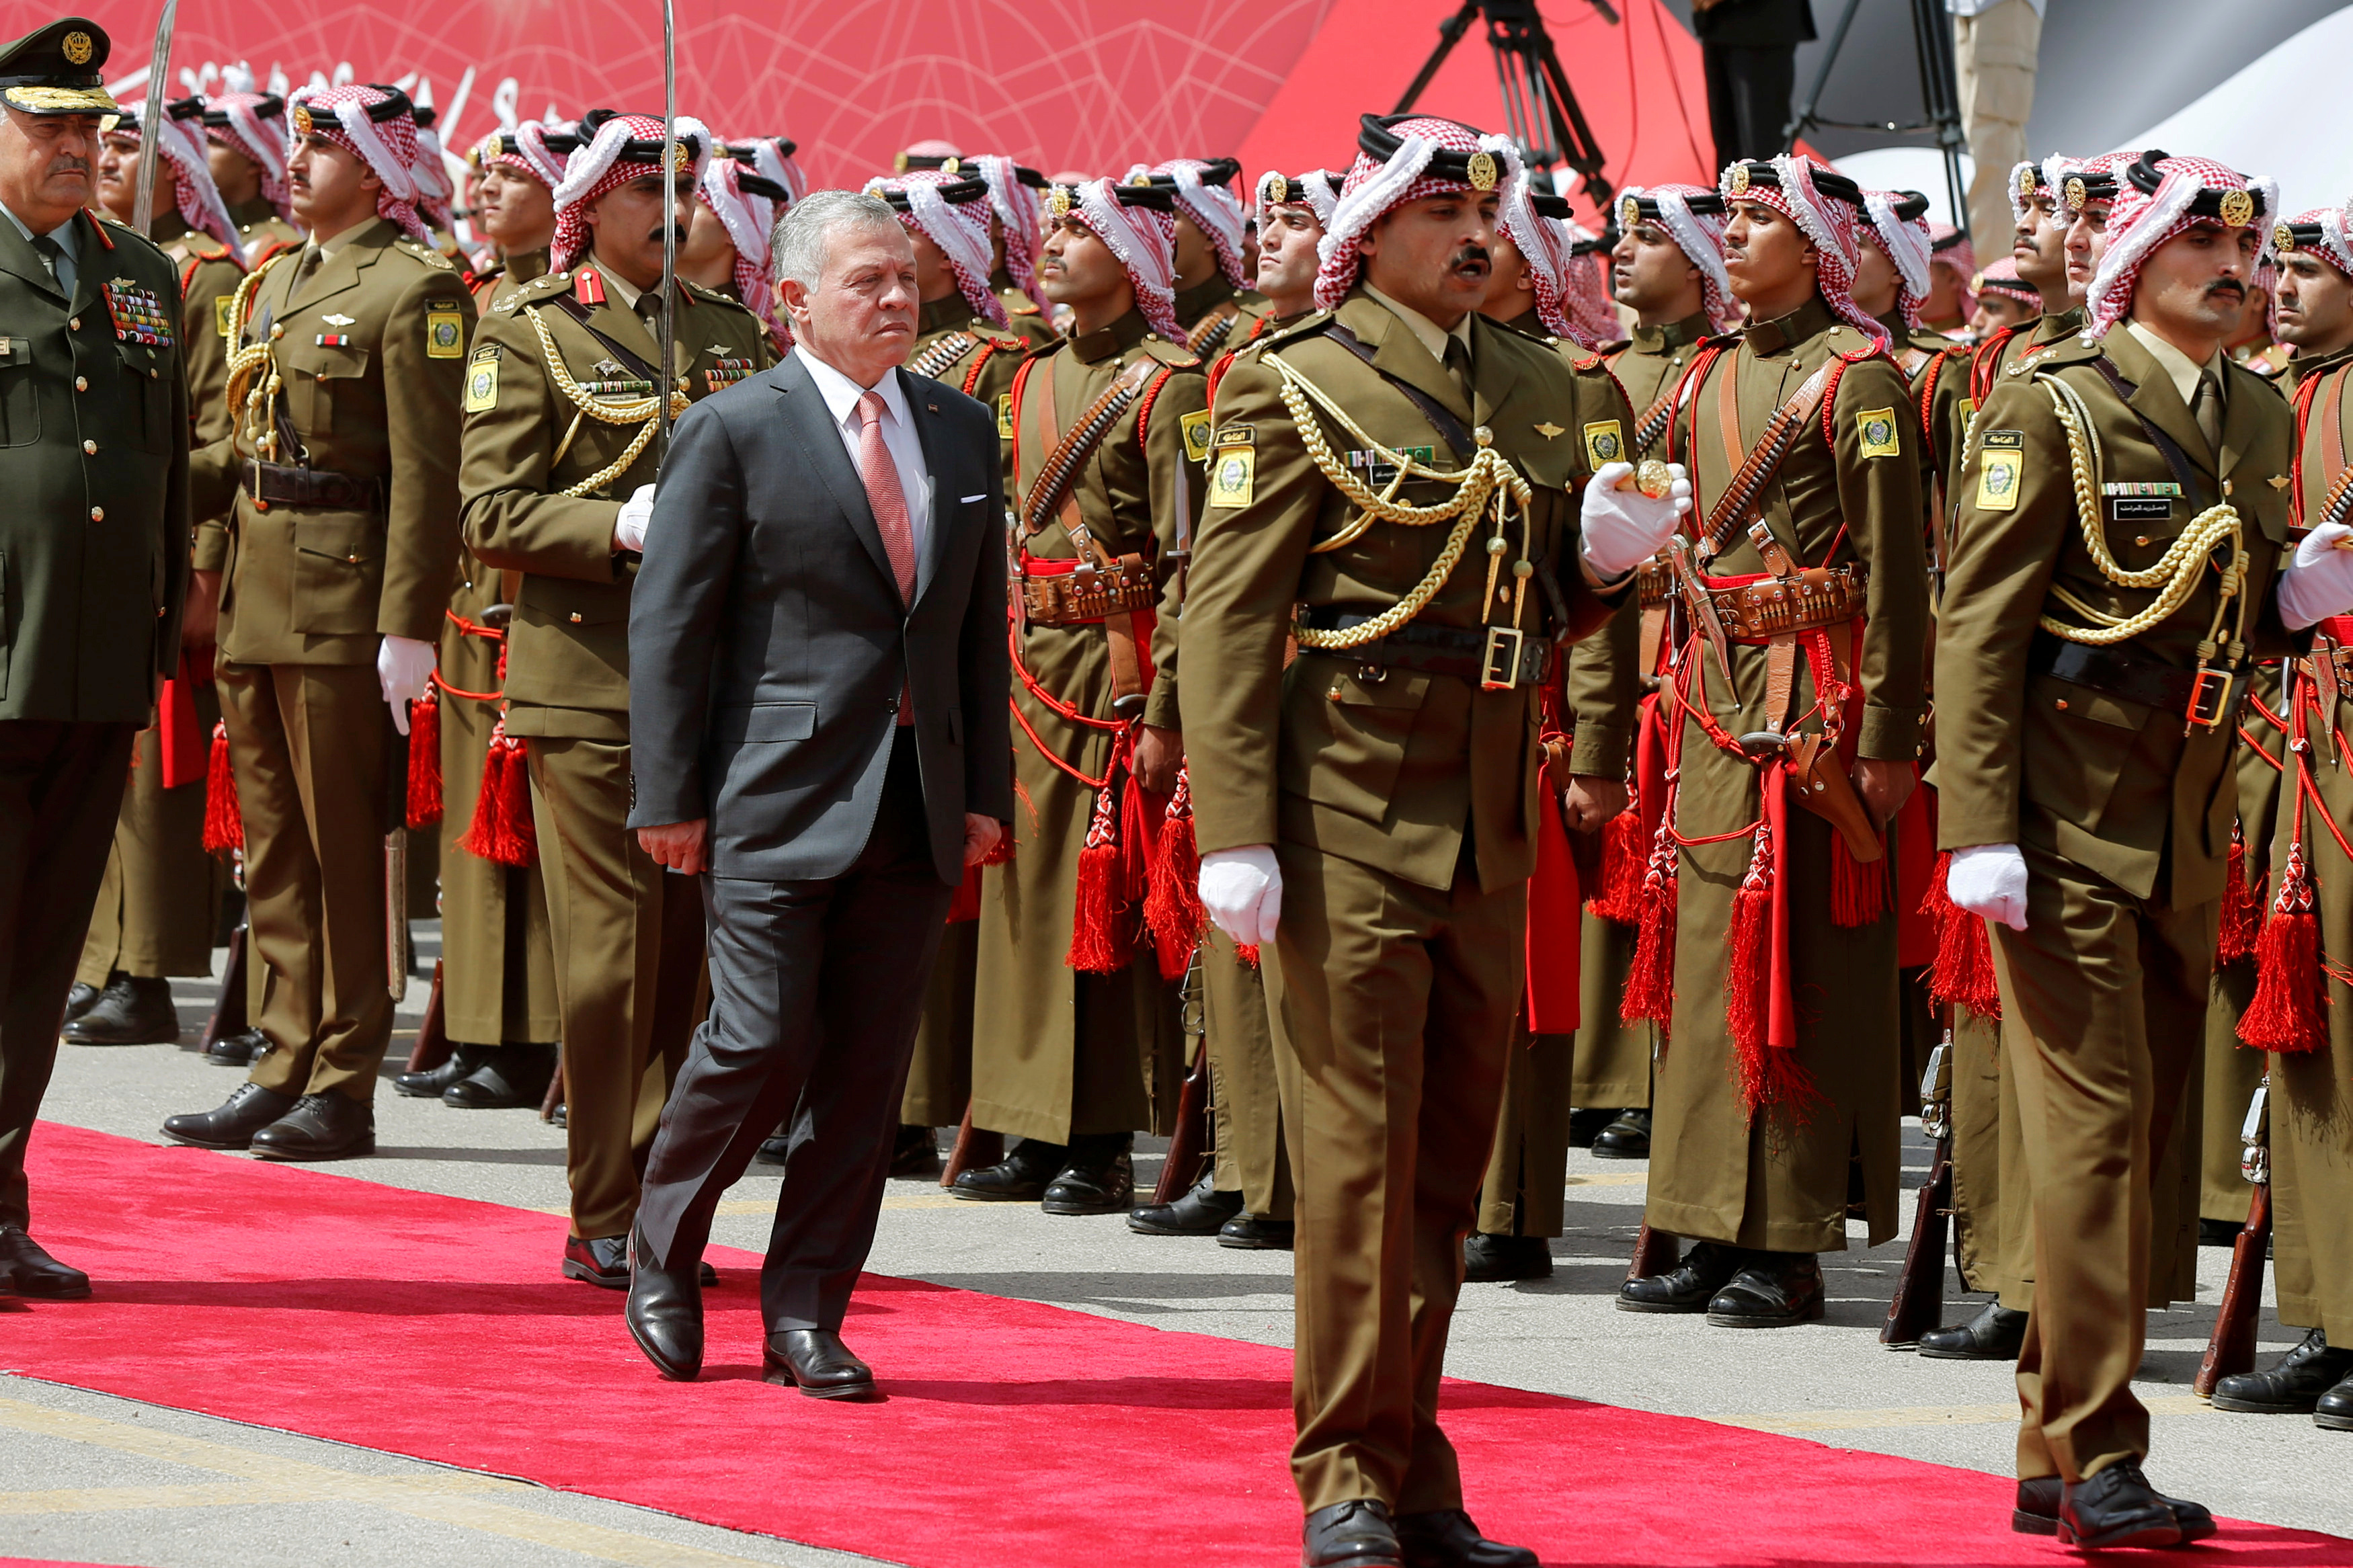 Jordan's King Abdullah is facing new risks—from his own friends